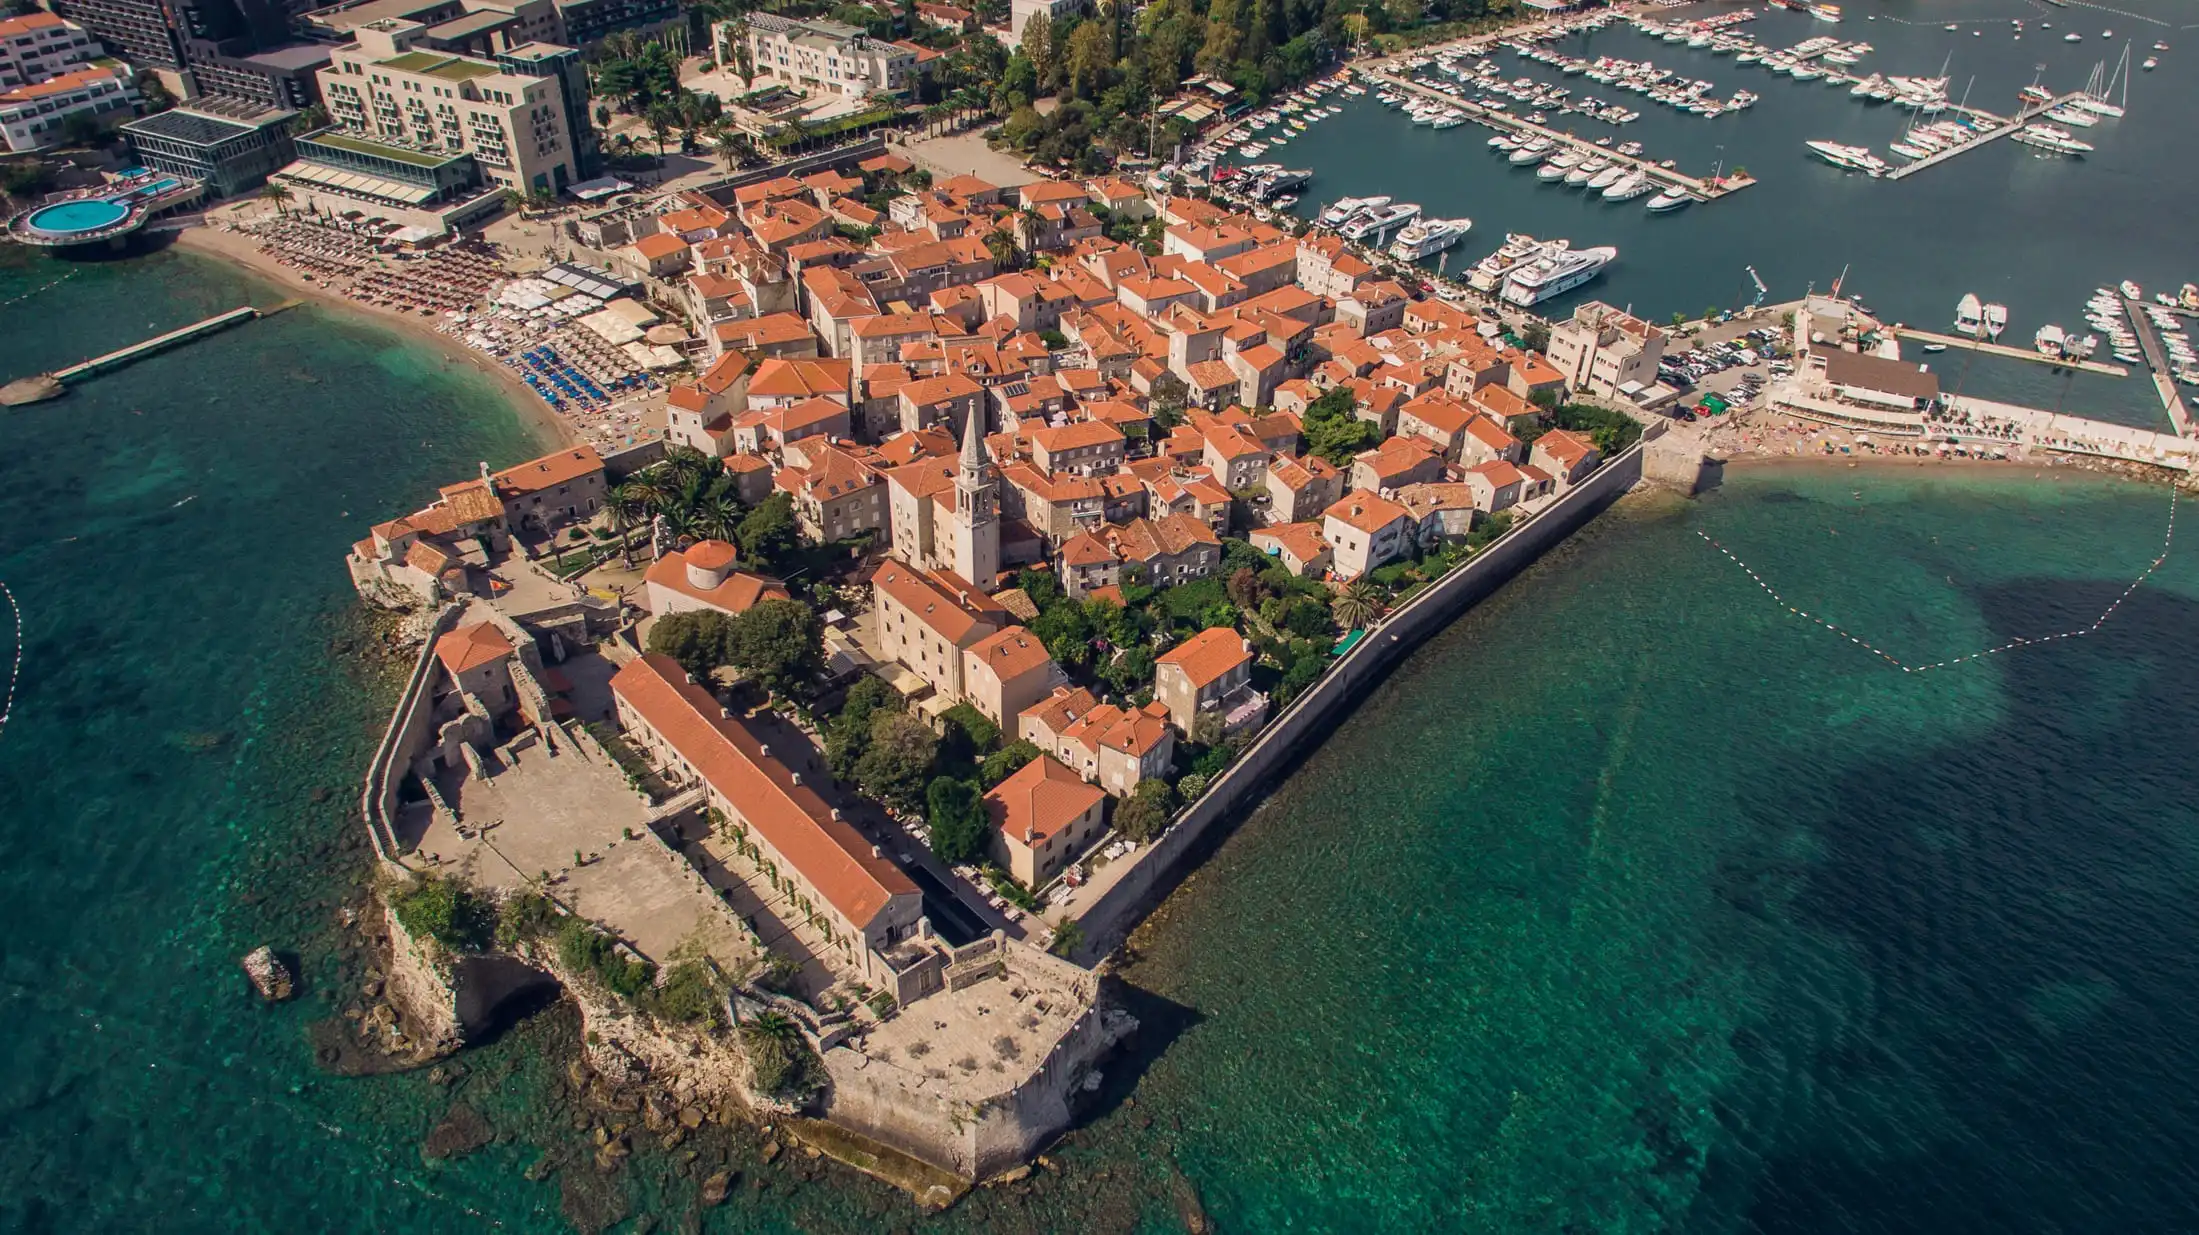 Aerial view of The Old Town in Budva